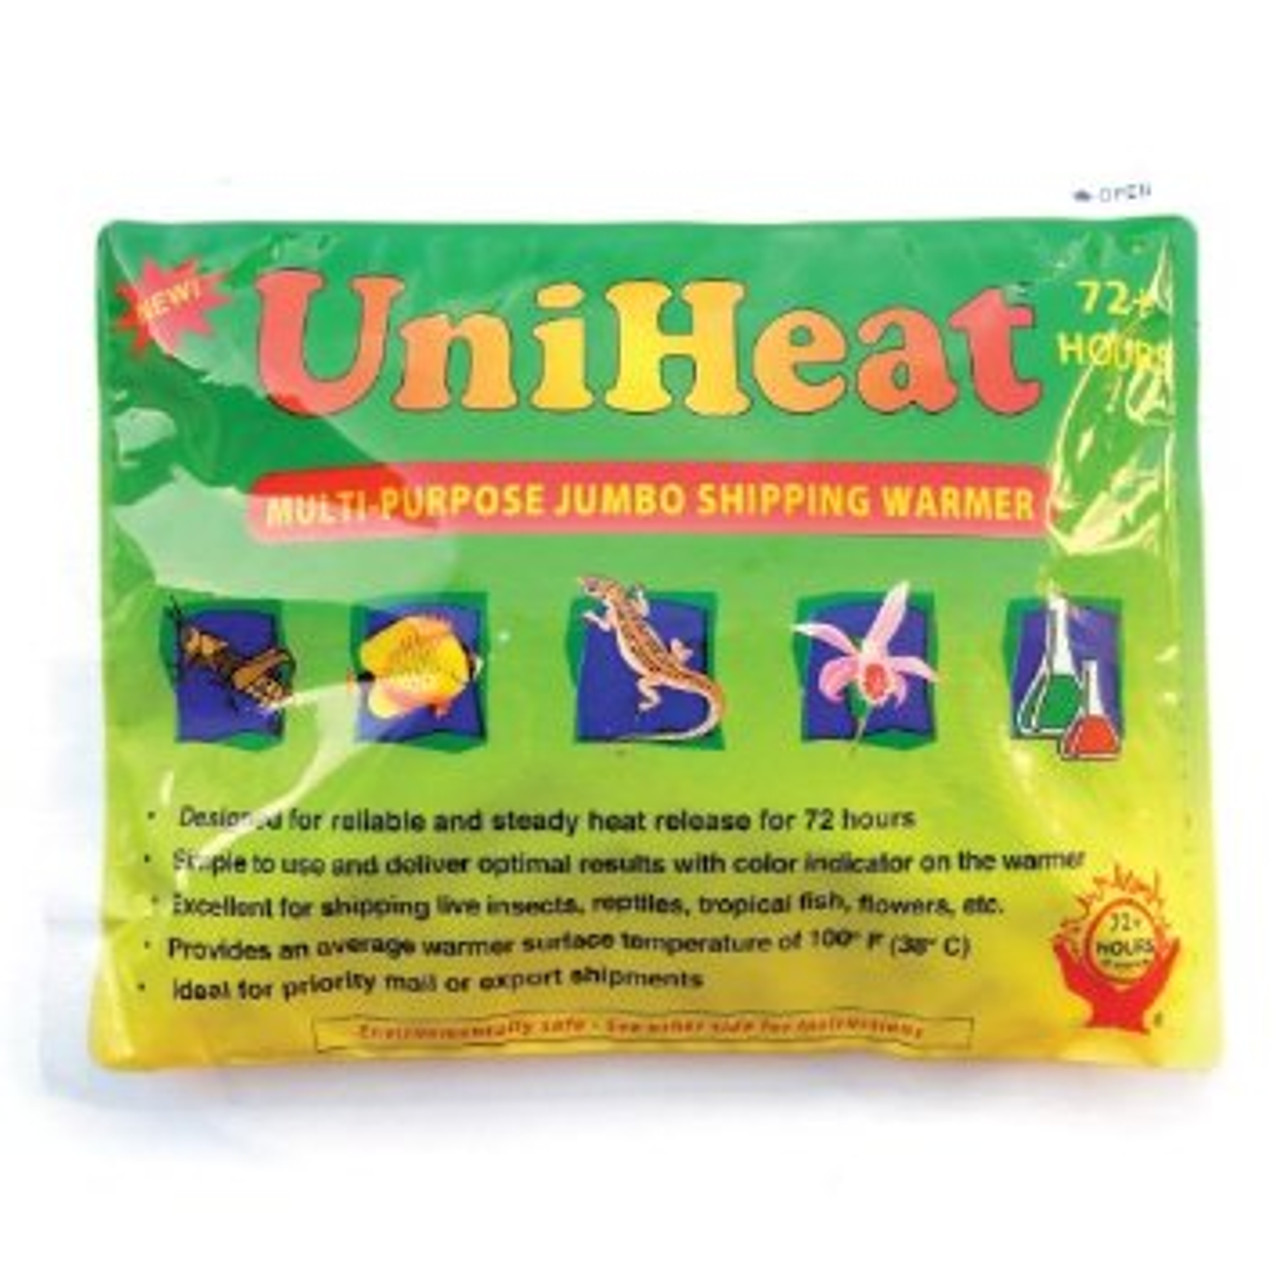 UniHeat 72 Hour Heat Pack as shipped